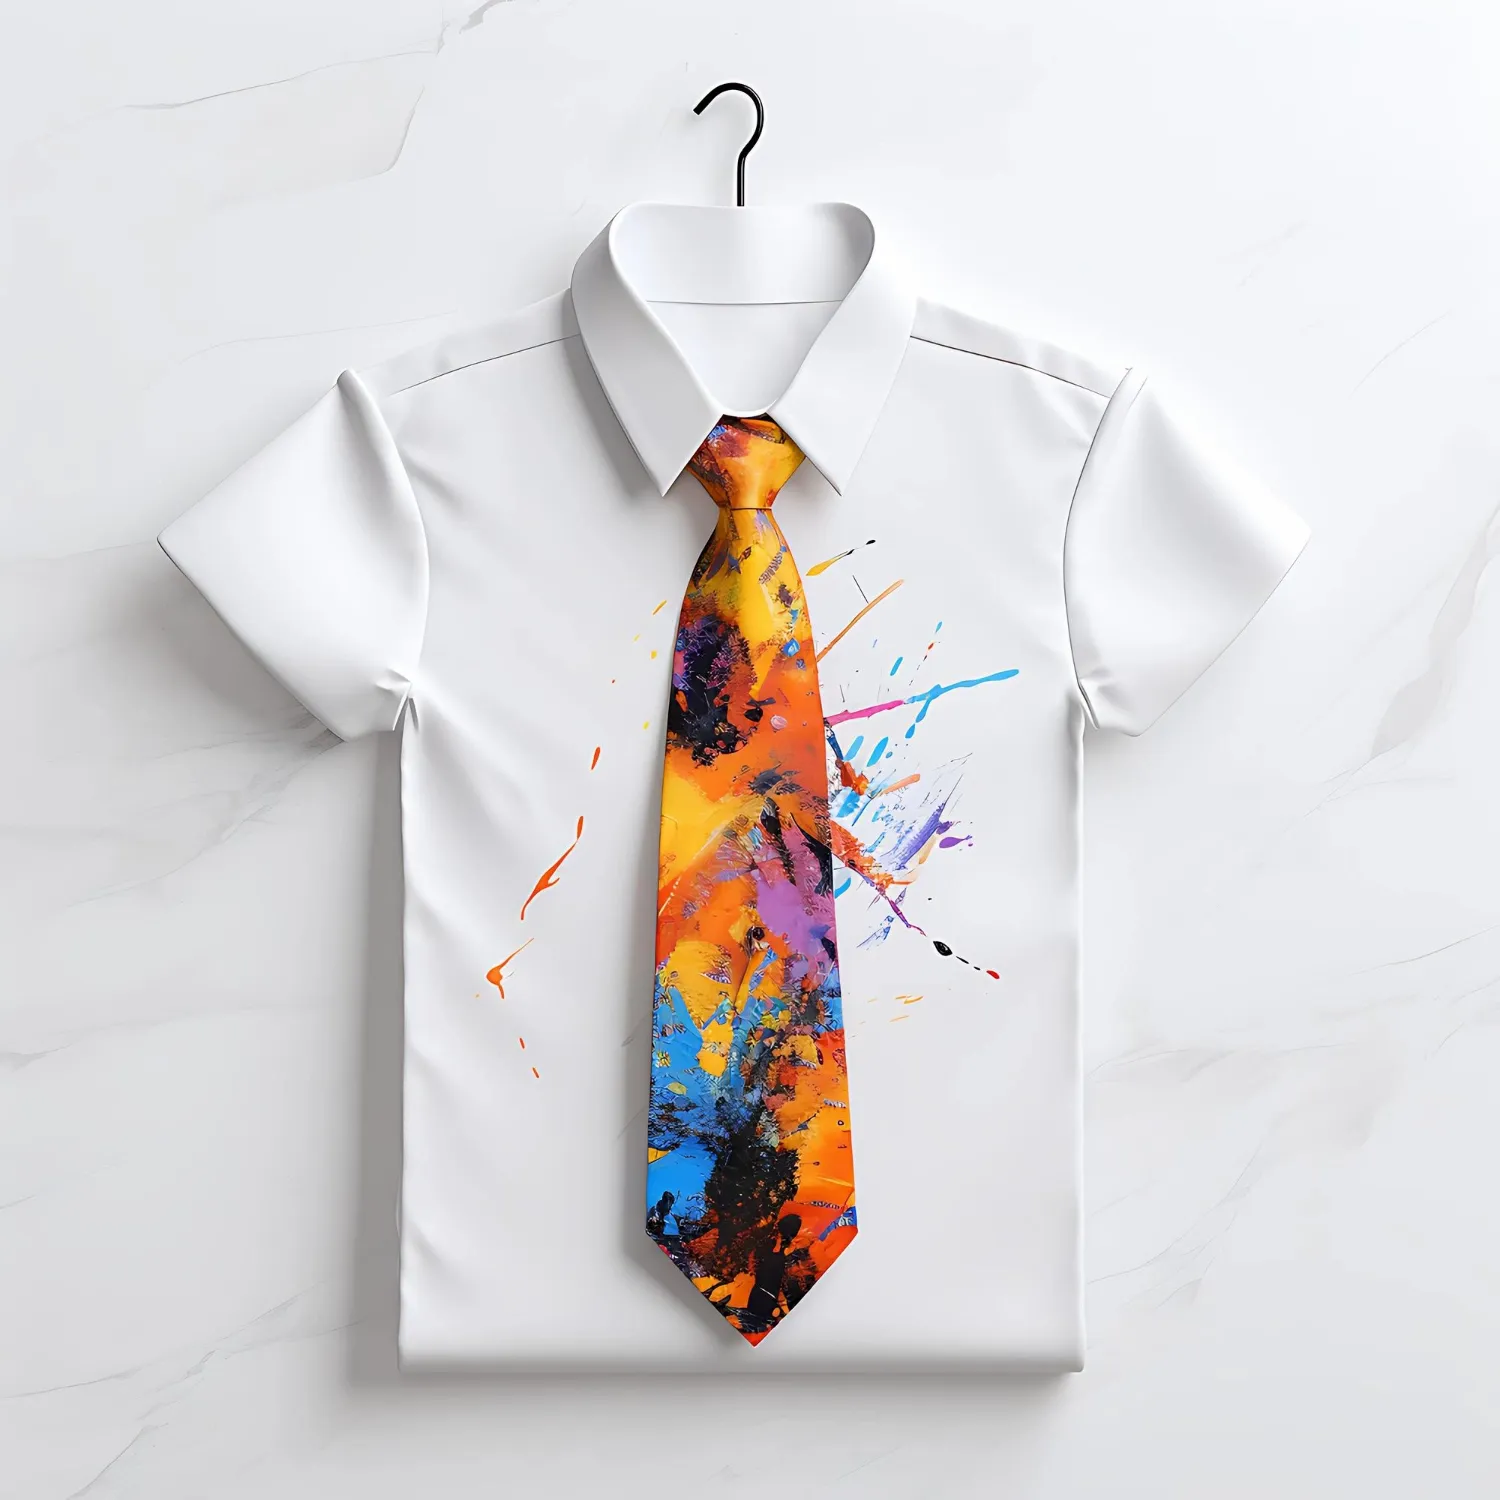 Tie Front T Shirt Abstract Print Bold and Contrasting Colors Clean Blank White Photoshoot Tee